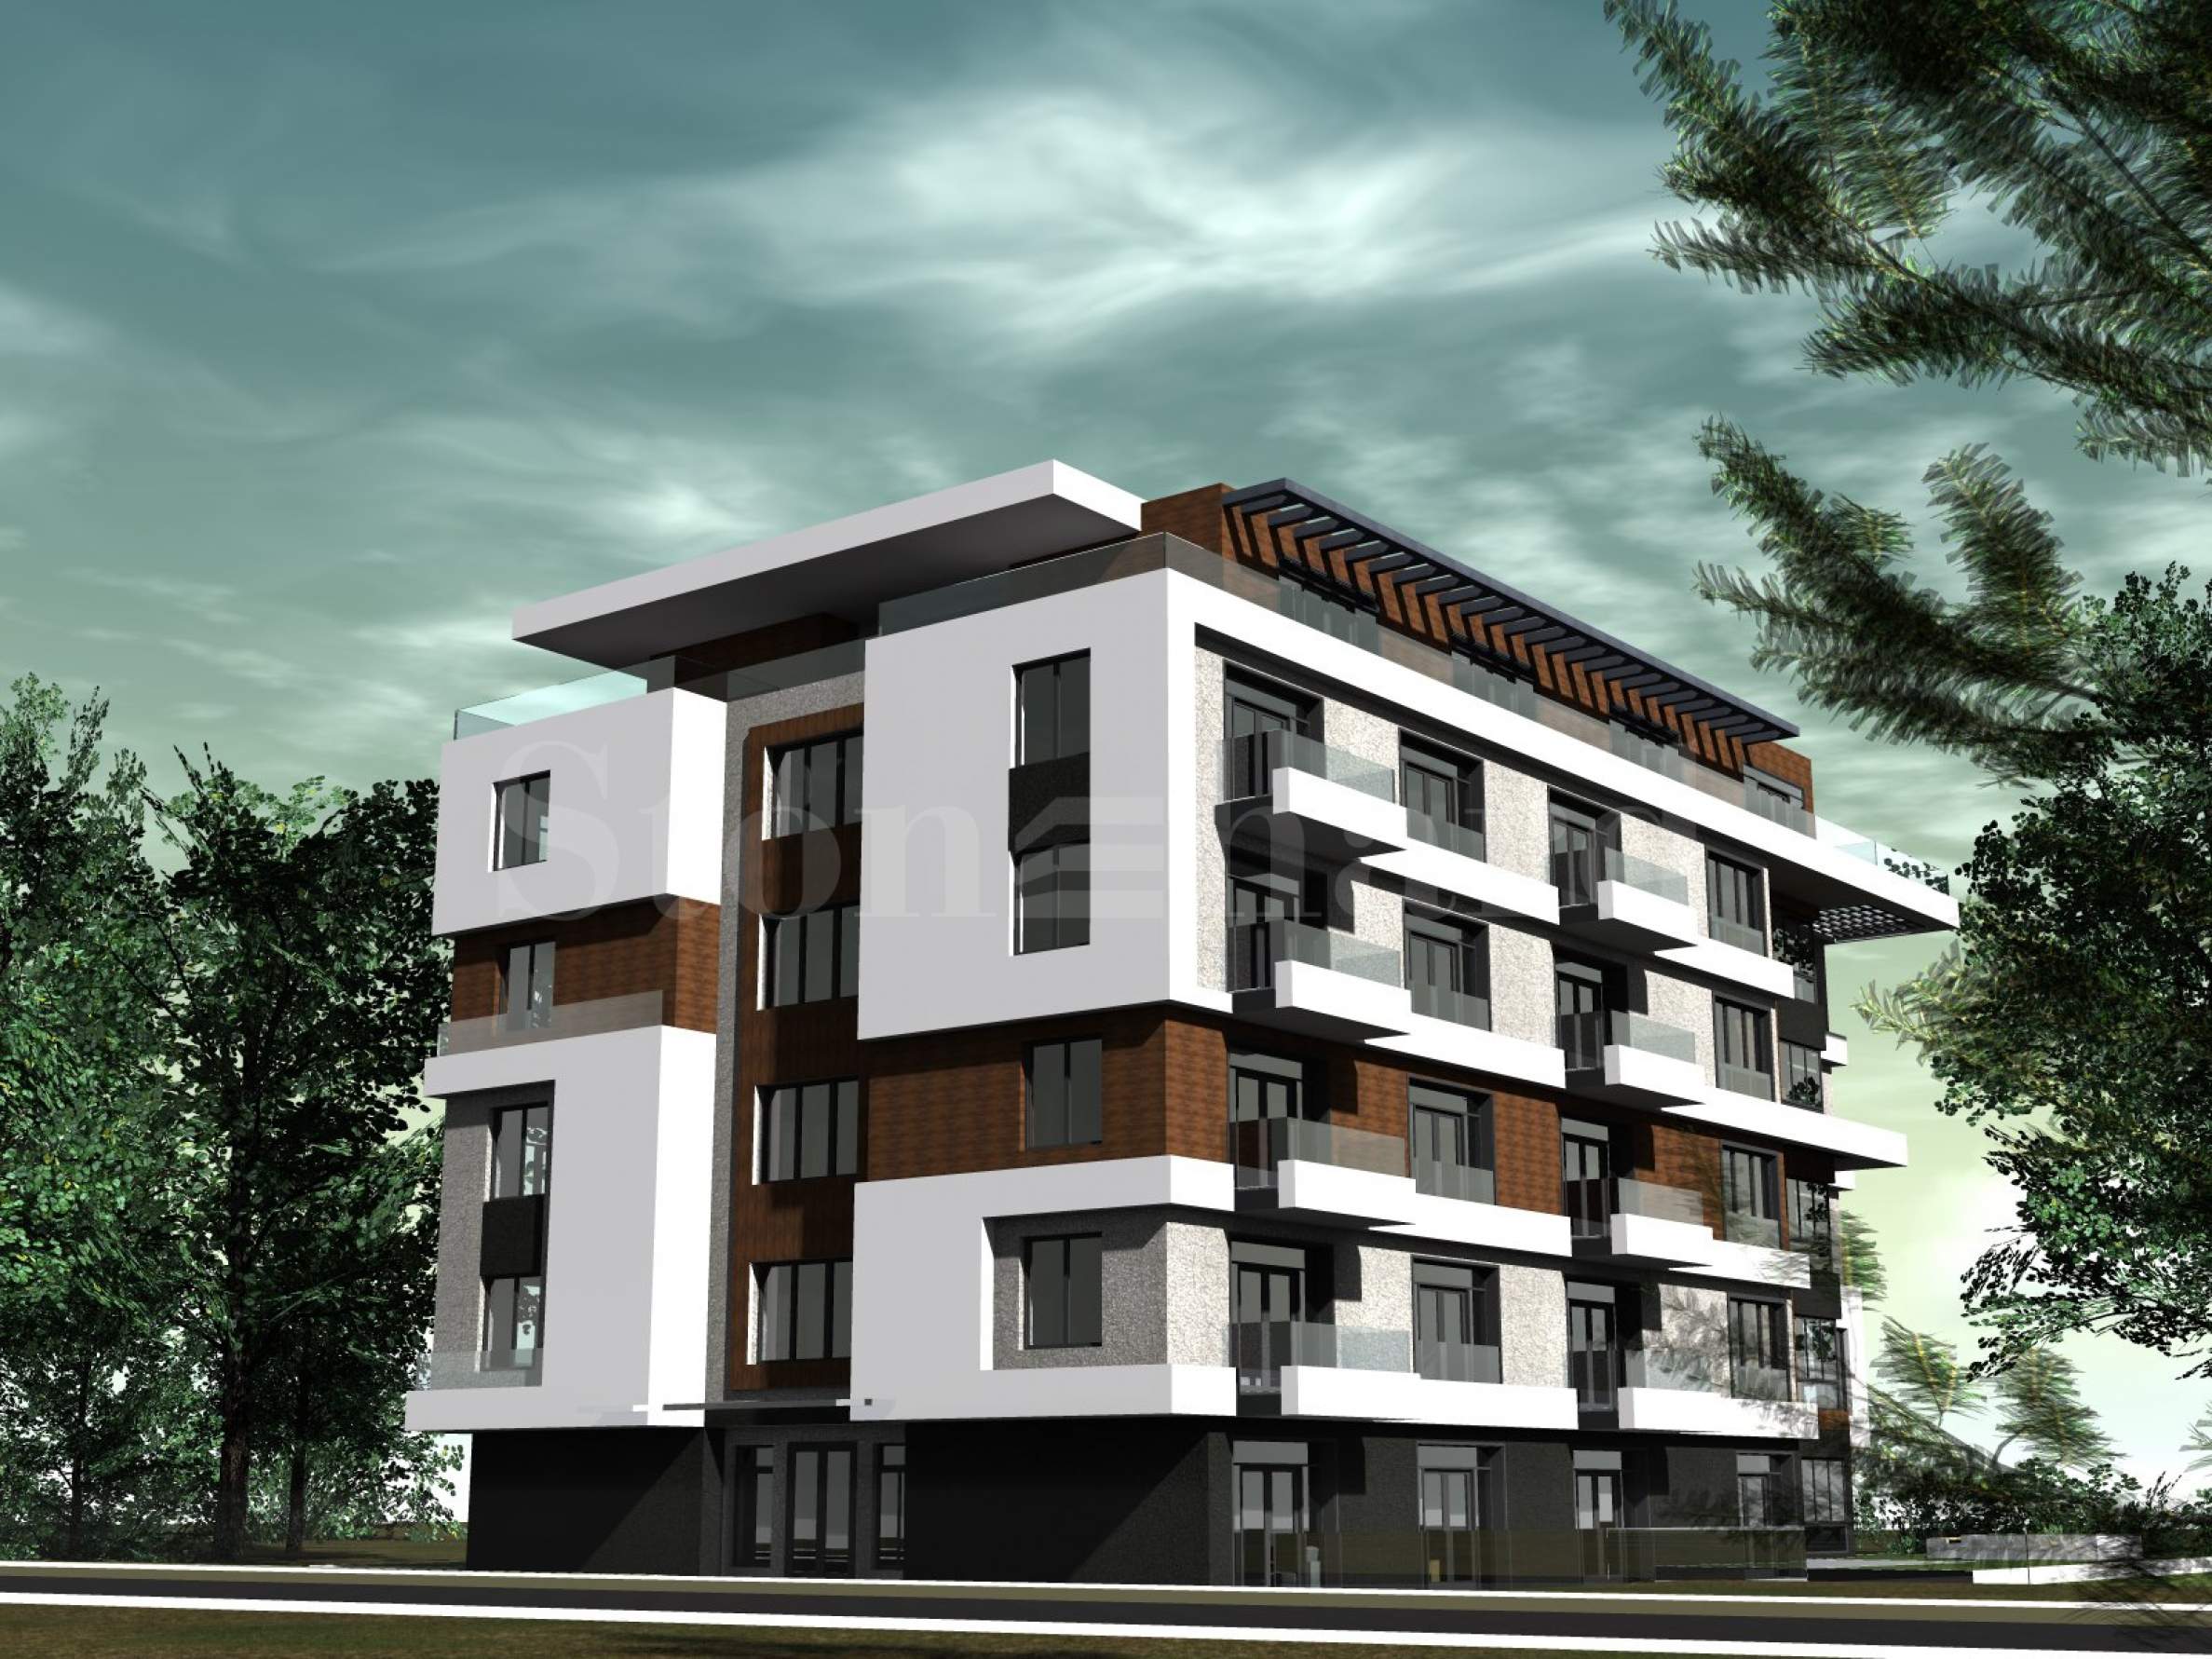 Elegant residential building with nice architecture in Dianabad District1 - Stonehard